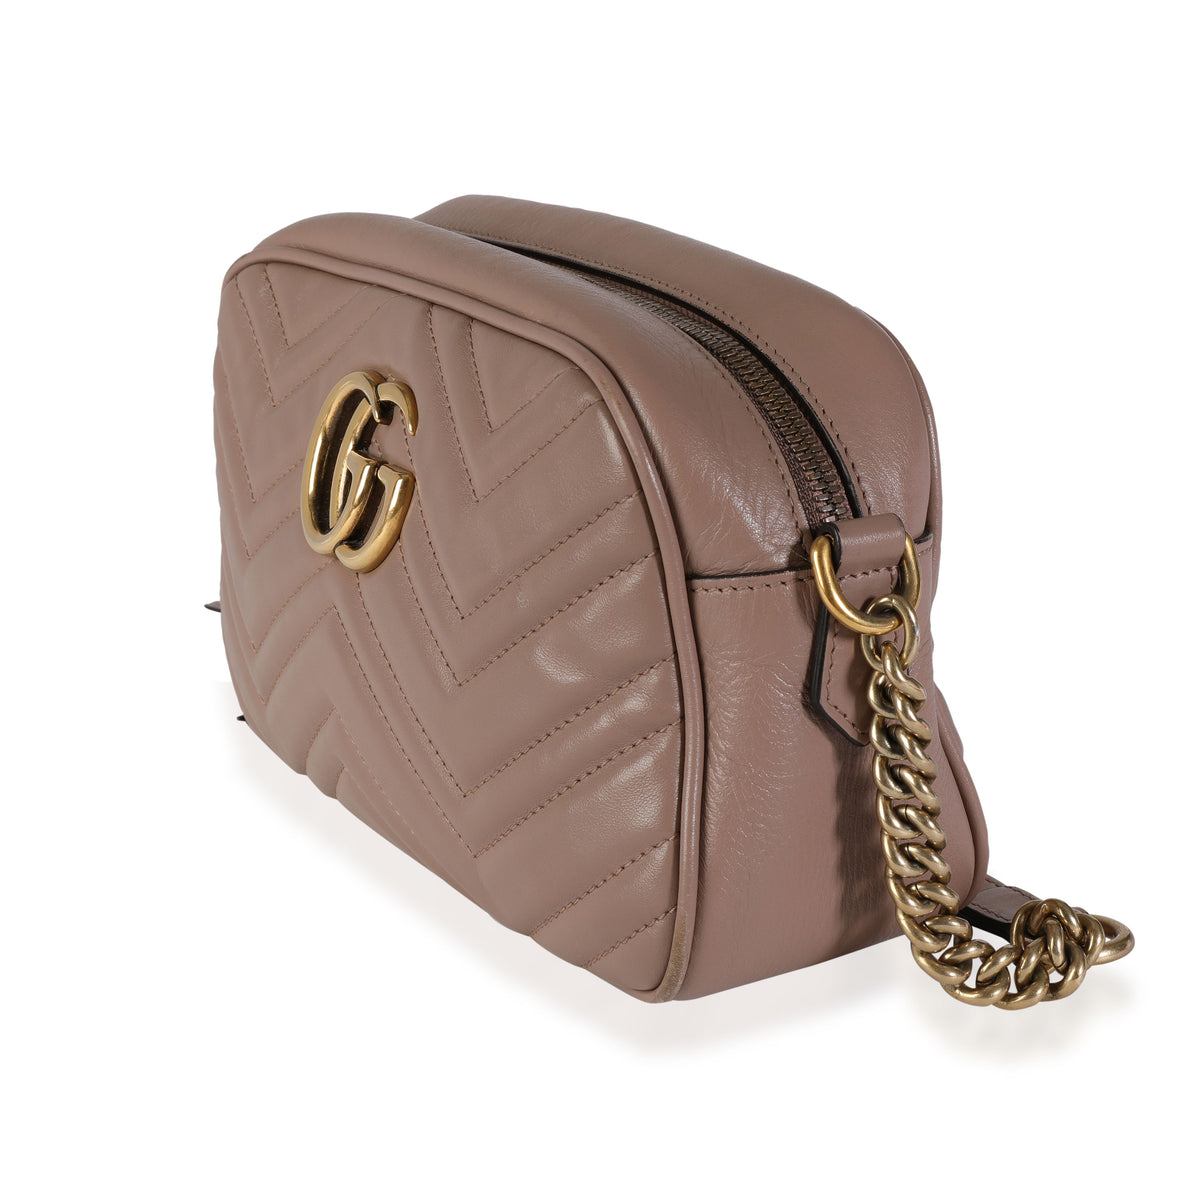 Gucci GG Marmont Camera Bag Matelasse Small Dusty Pink in Leather